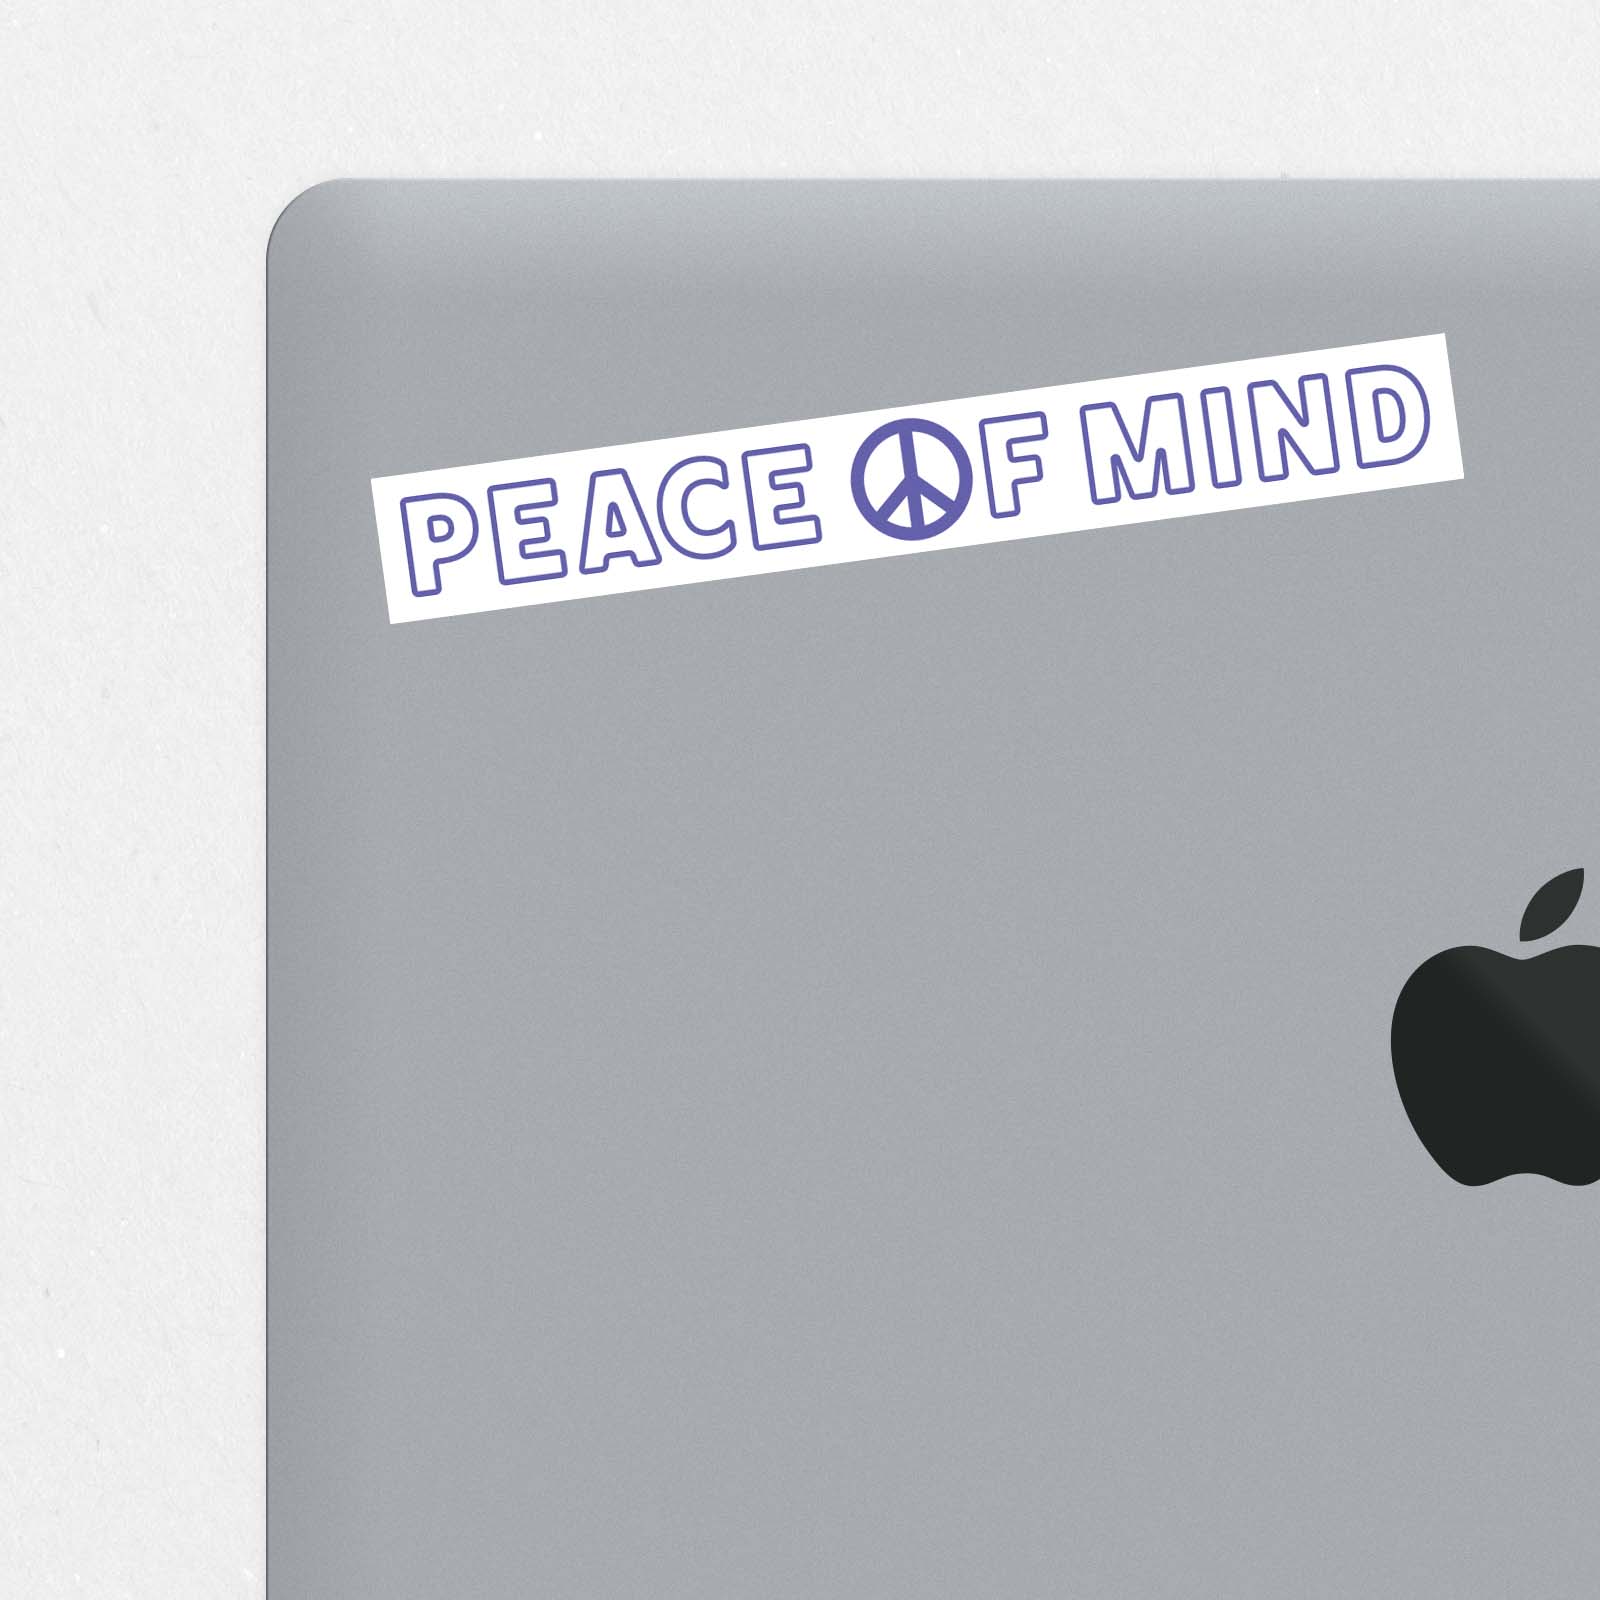 x2 Peace of Mind Printed Stickers